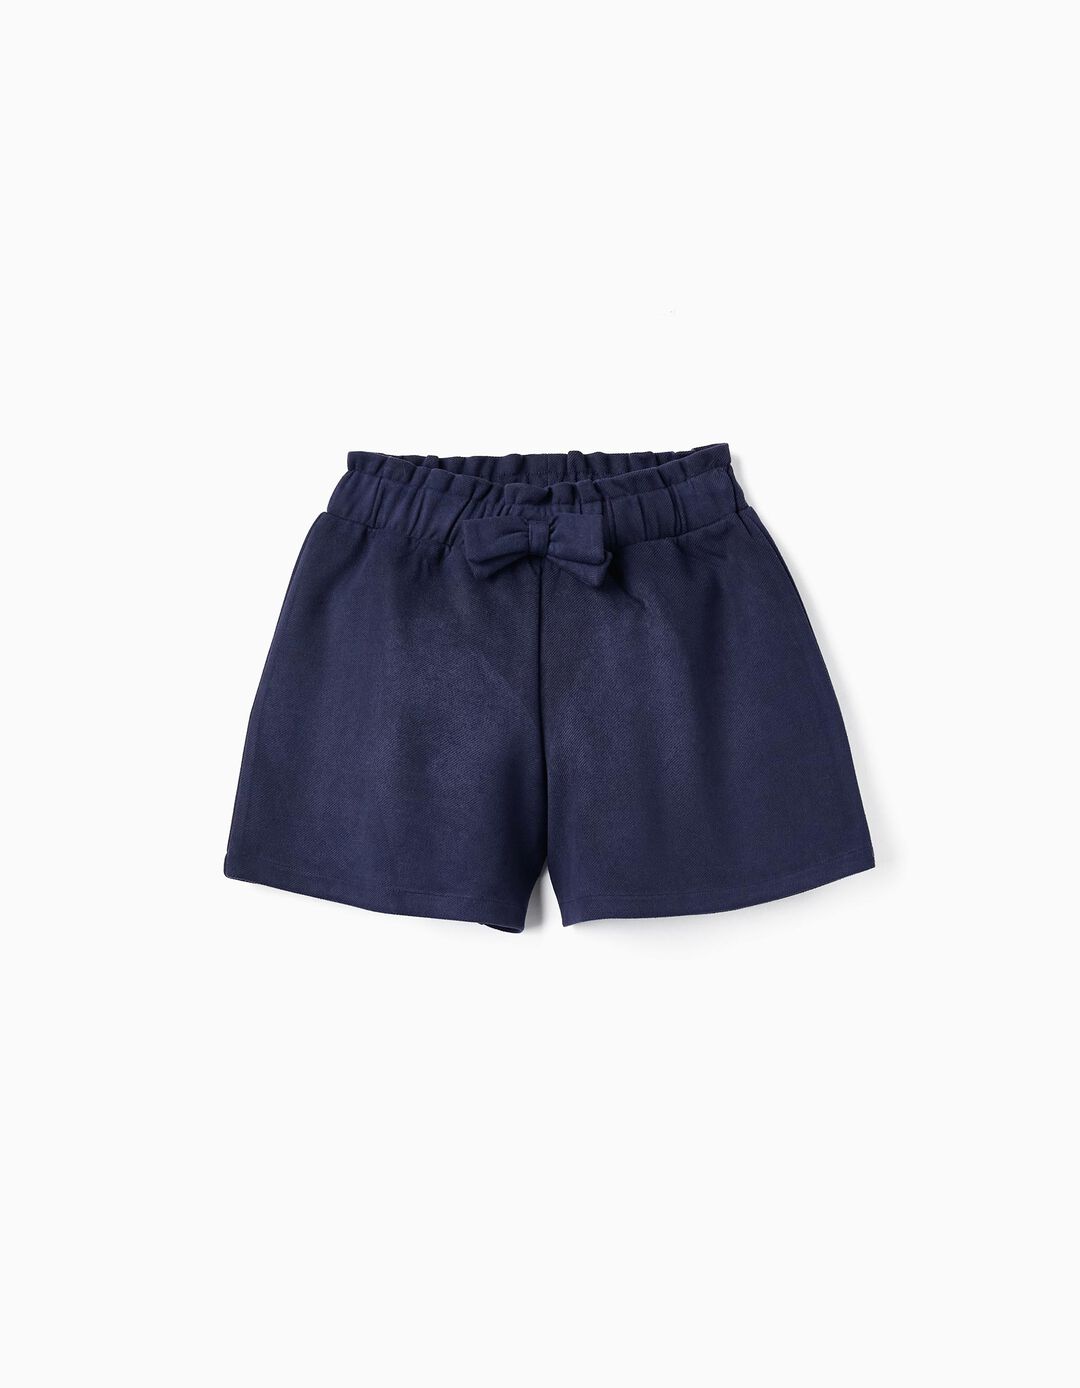 Shorts with Bow for Girls, Dark Blue